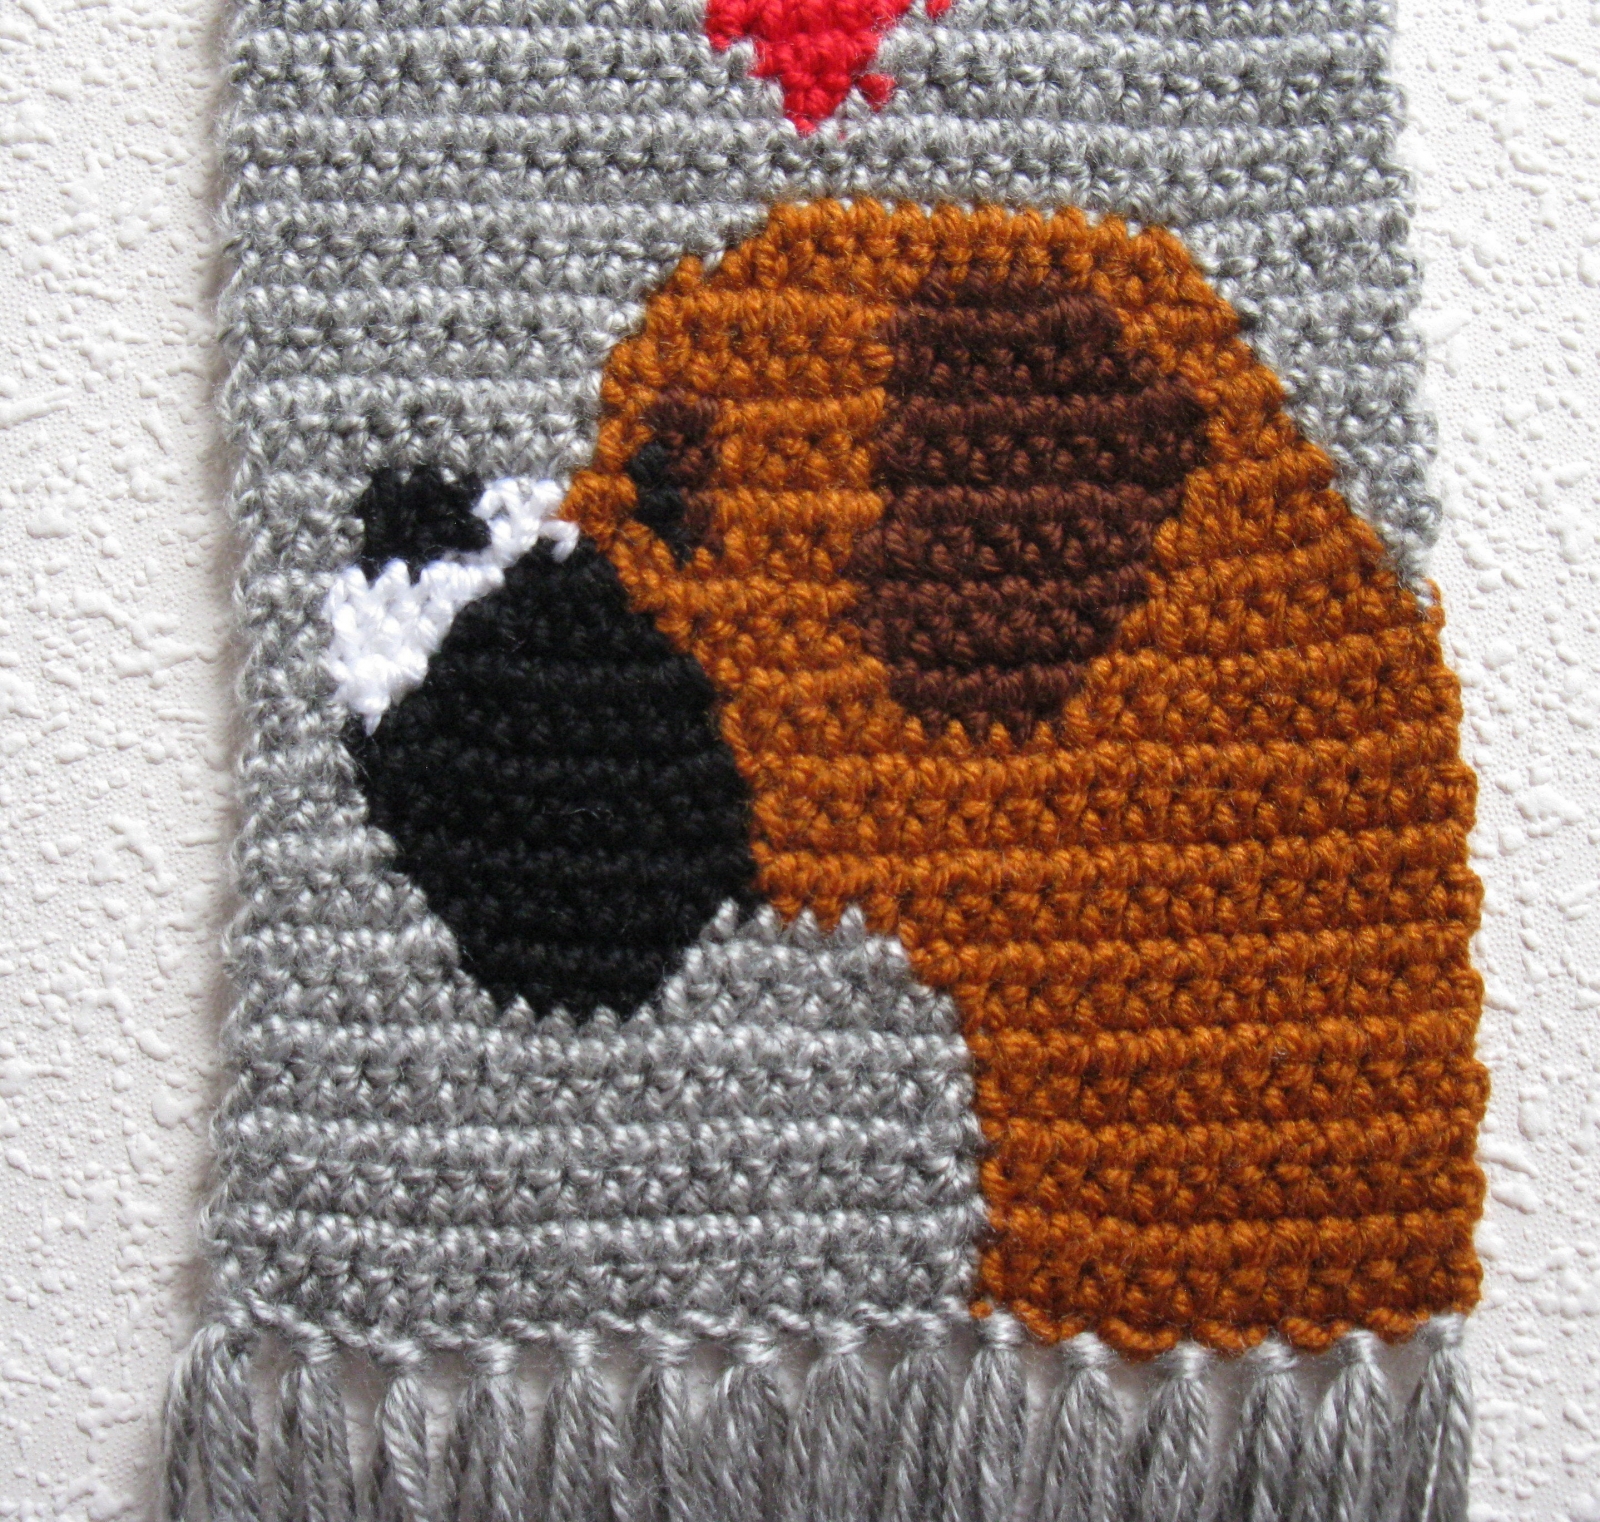 Knit Boxer scarf. Gray crochet scarf with boxer dogs and red hearts ...